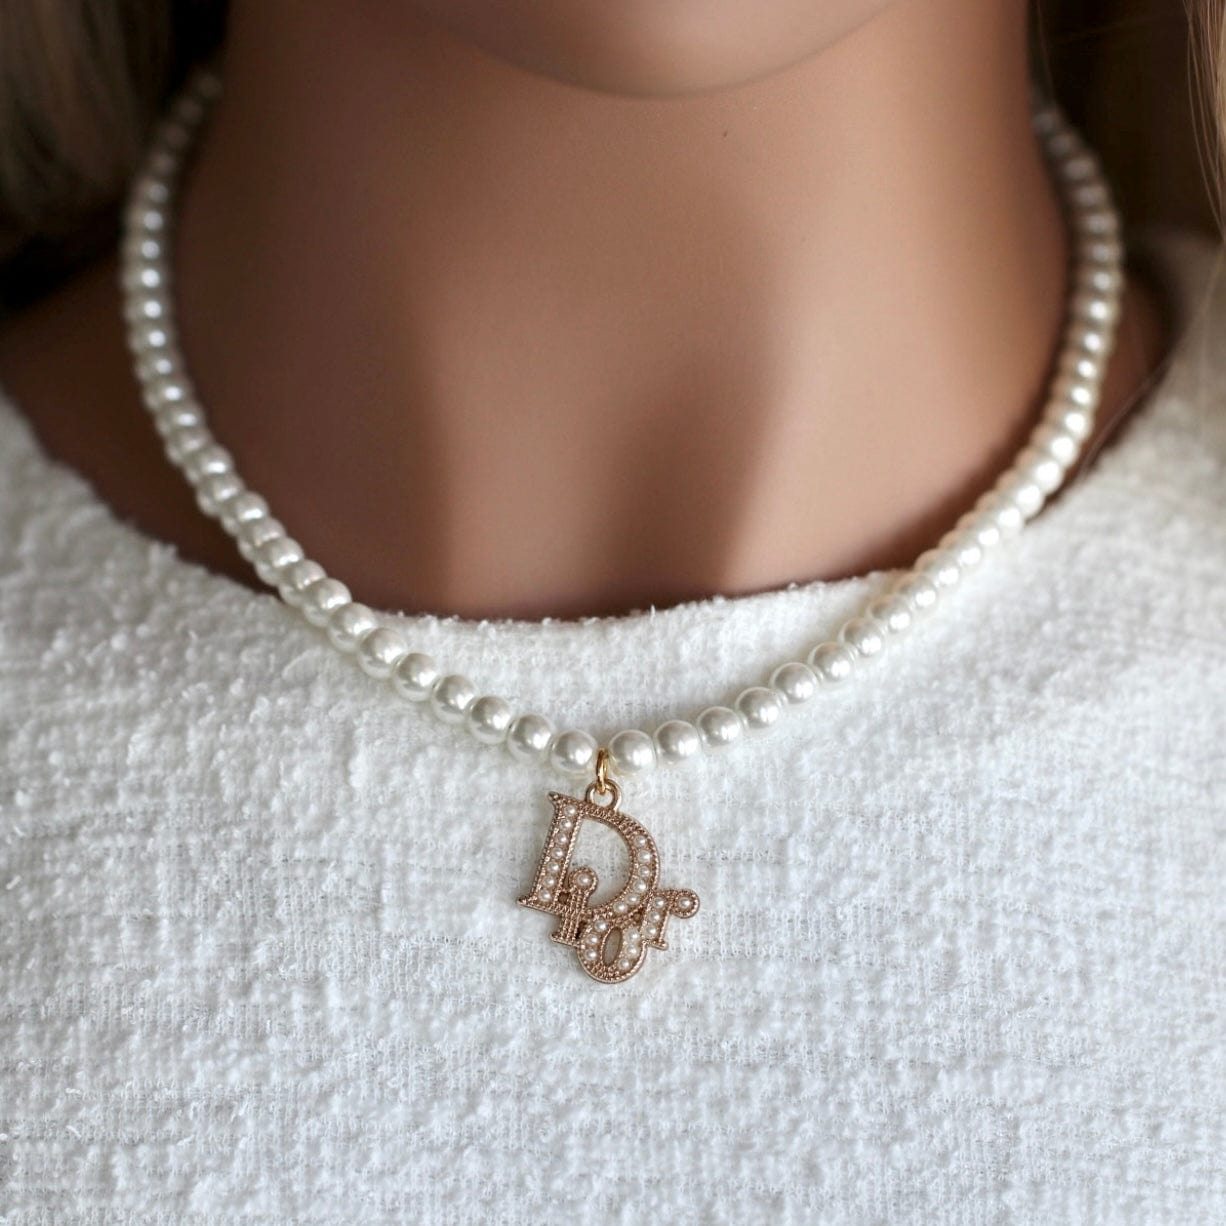 christian dior pearl necklace  eBay